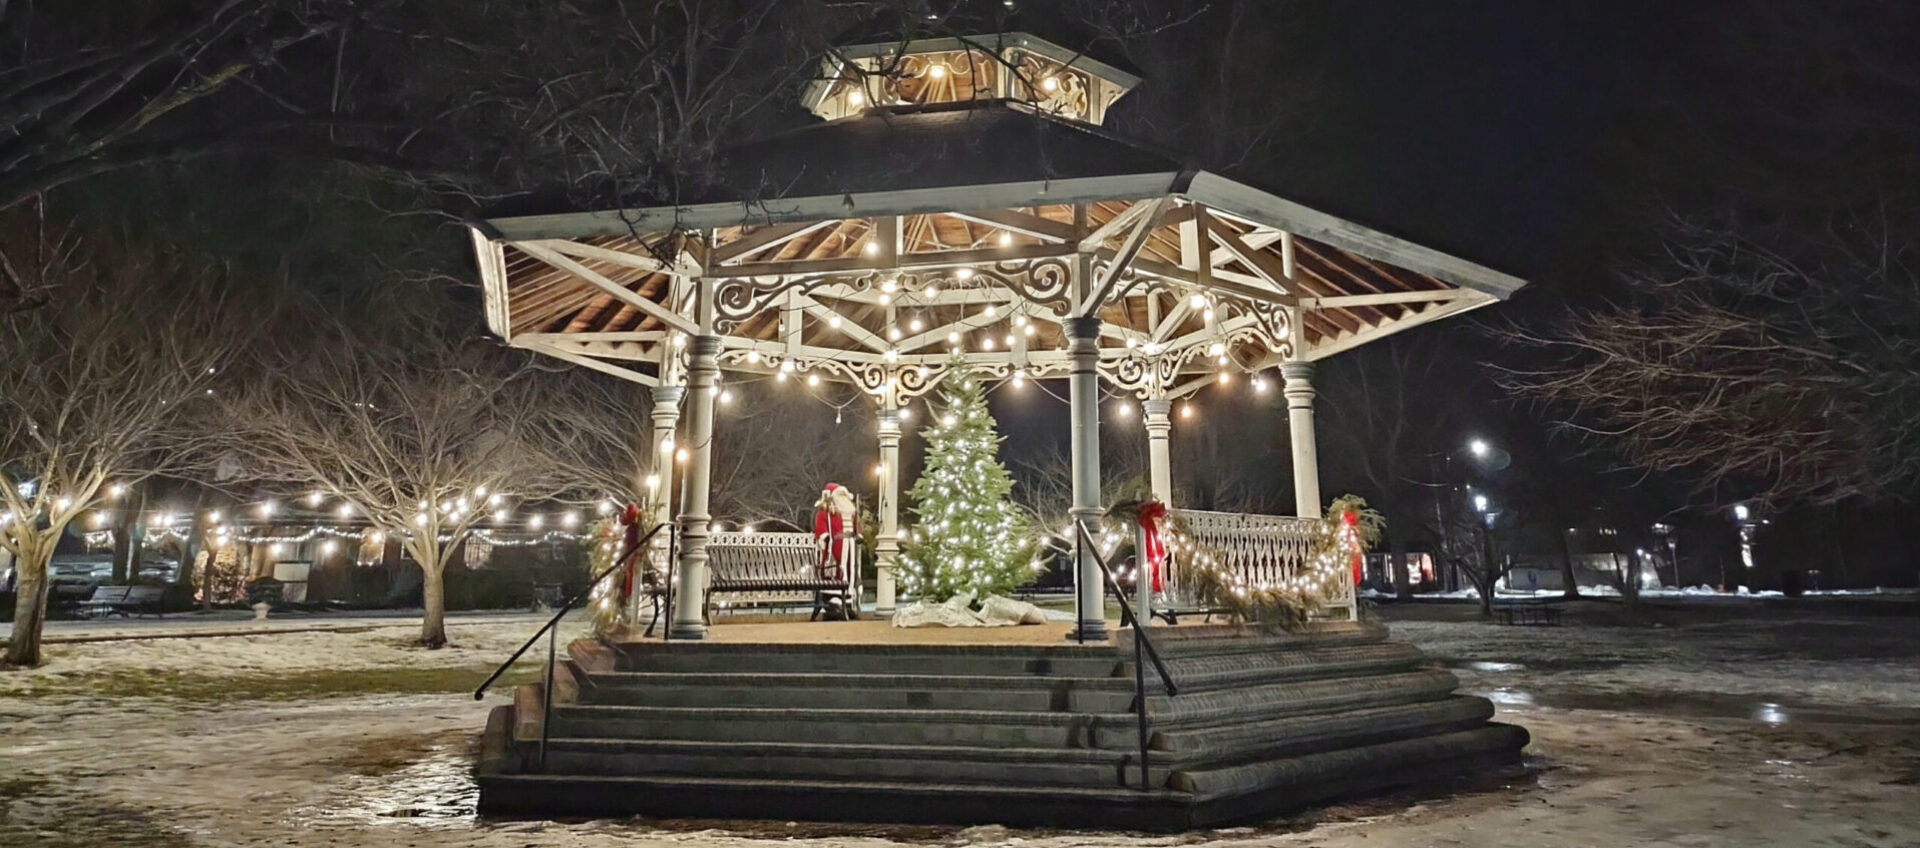 Would You Like to help Sponsor Bellefonte Victorian Christmas this year?